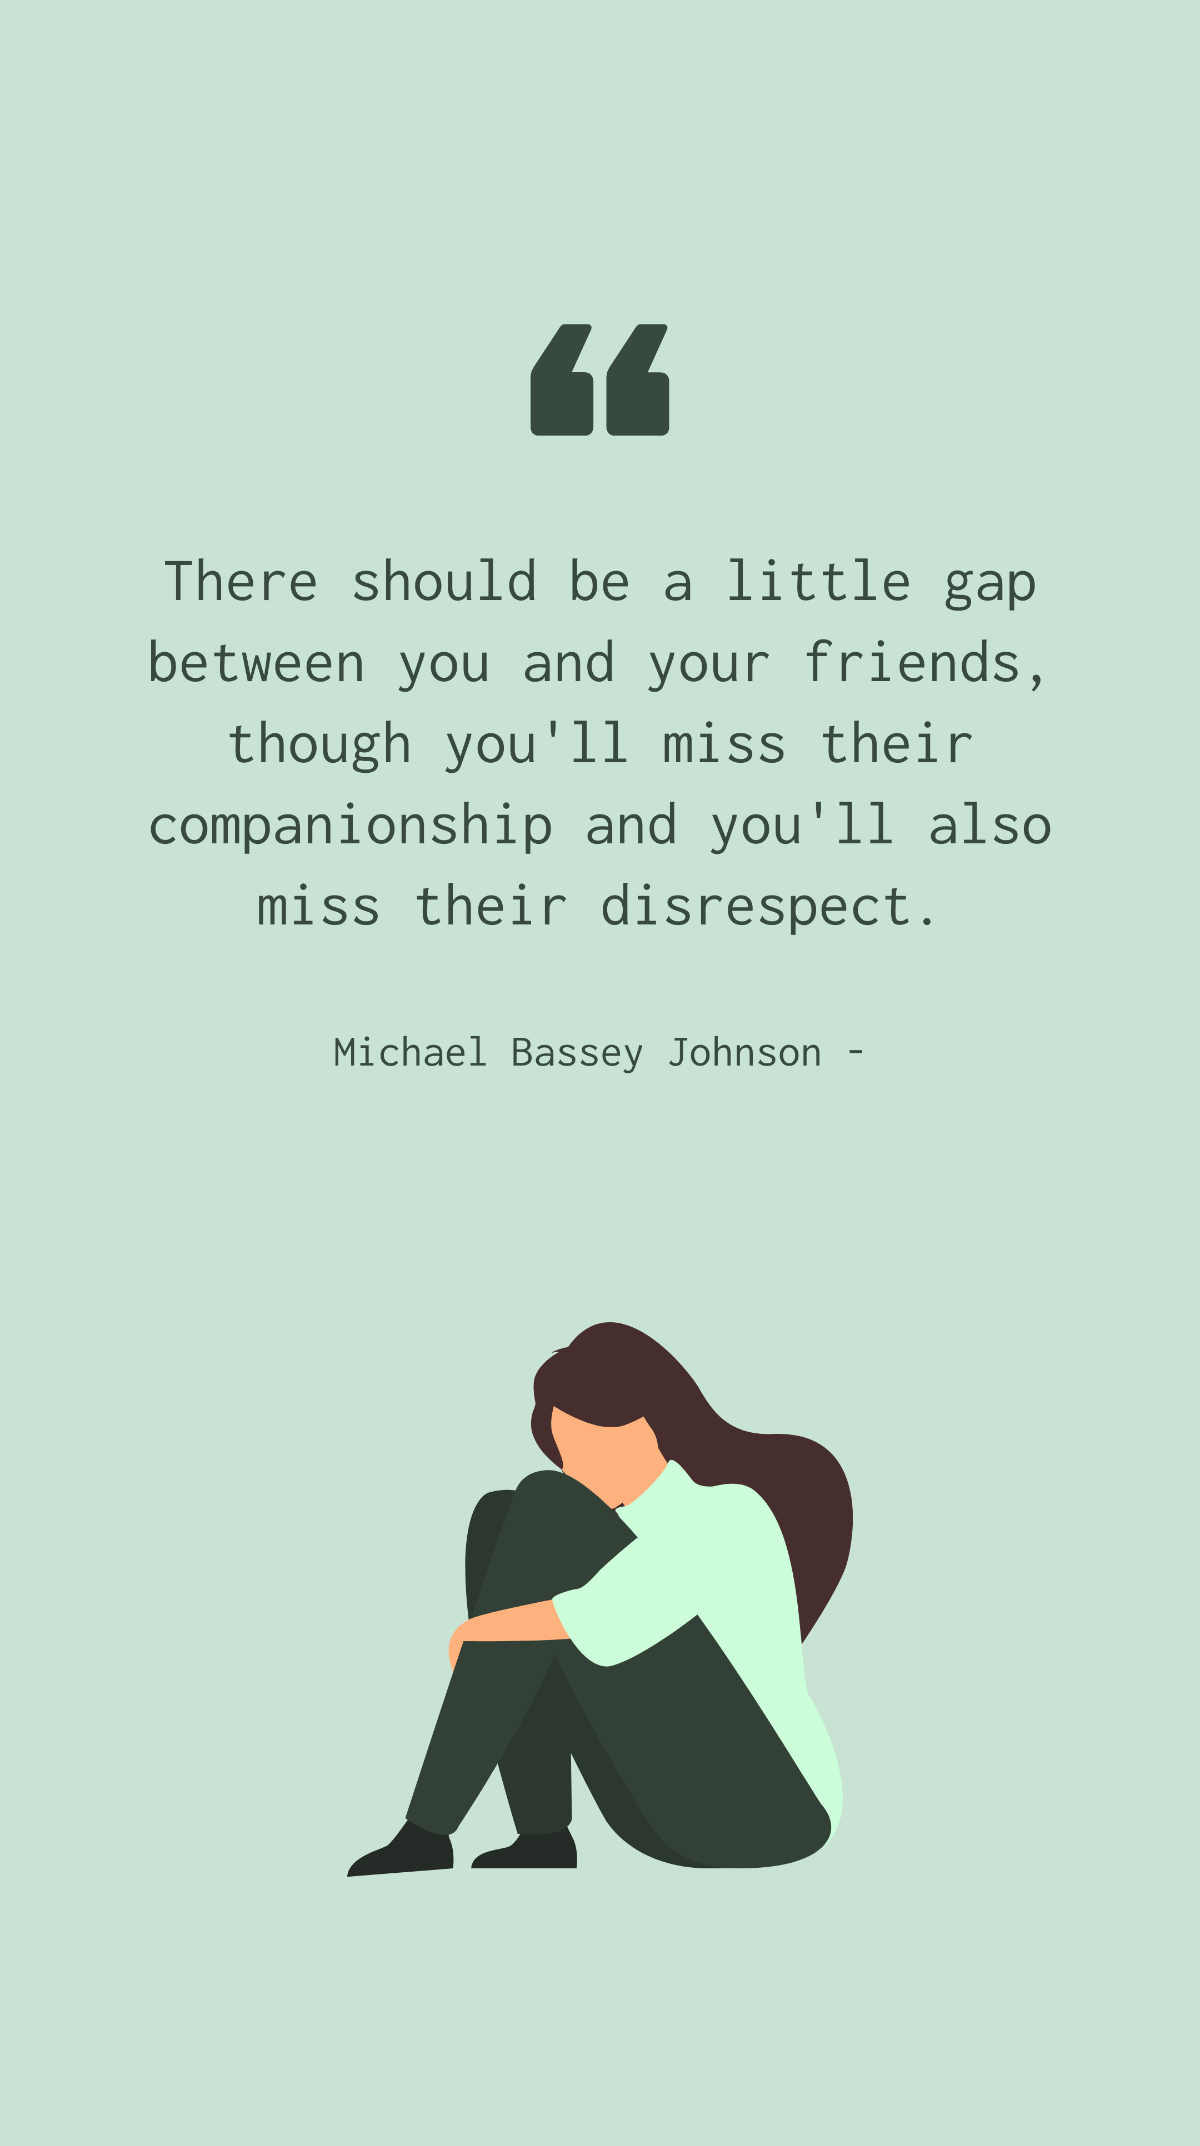 Michael Bassey Johnson - There should be a little gap between you and your friends, though you'll miss their companionship and you'll also miss their disrespect. Template